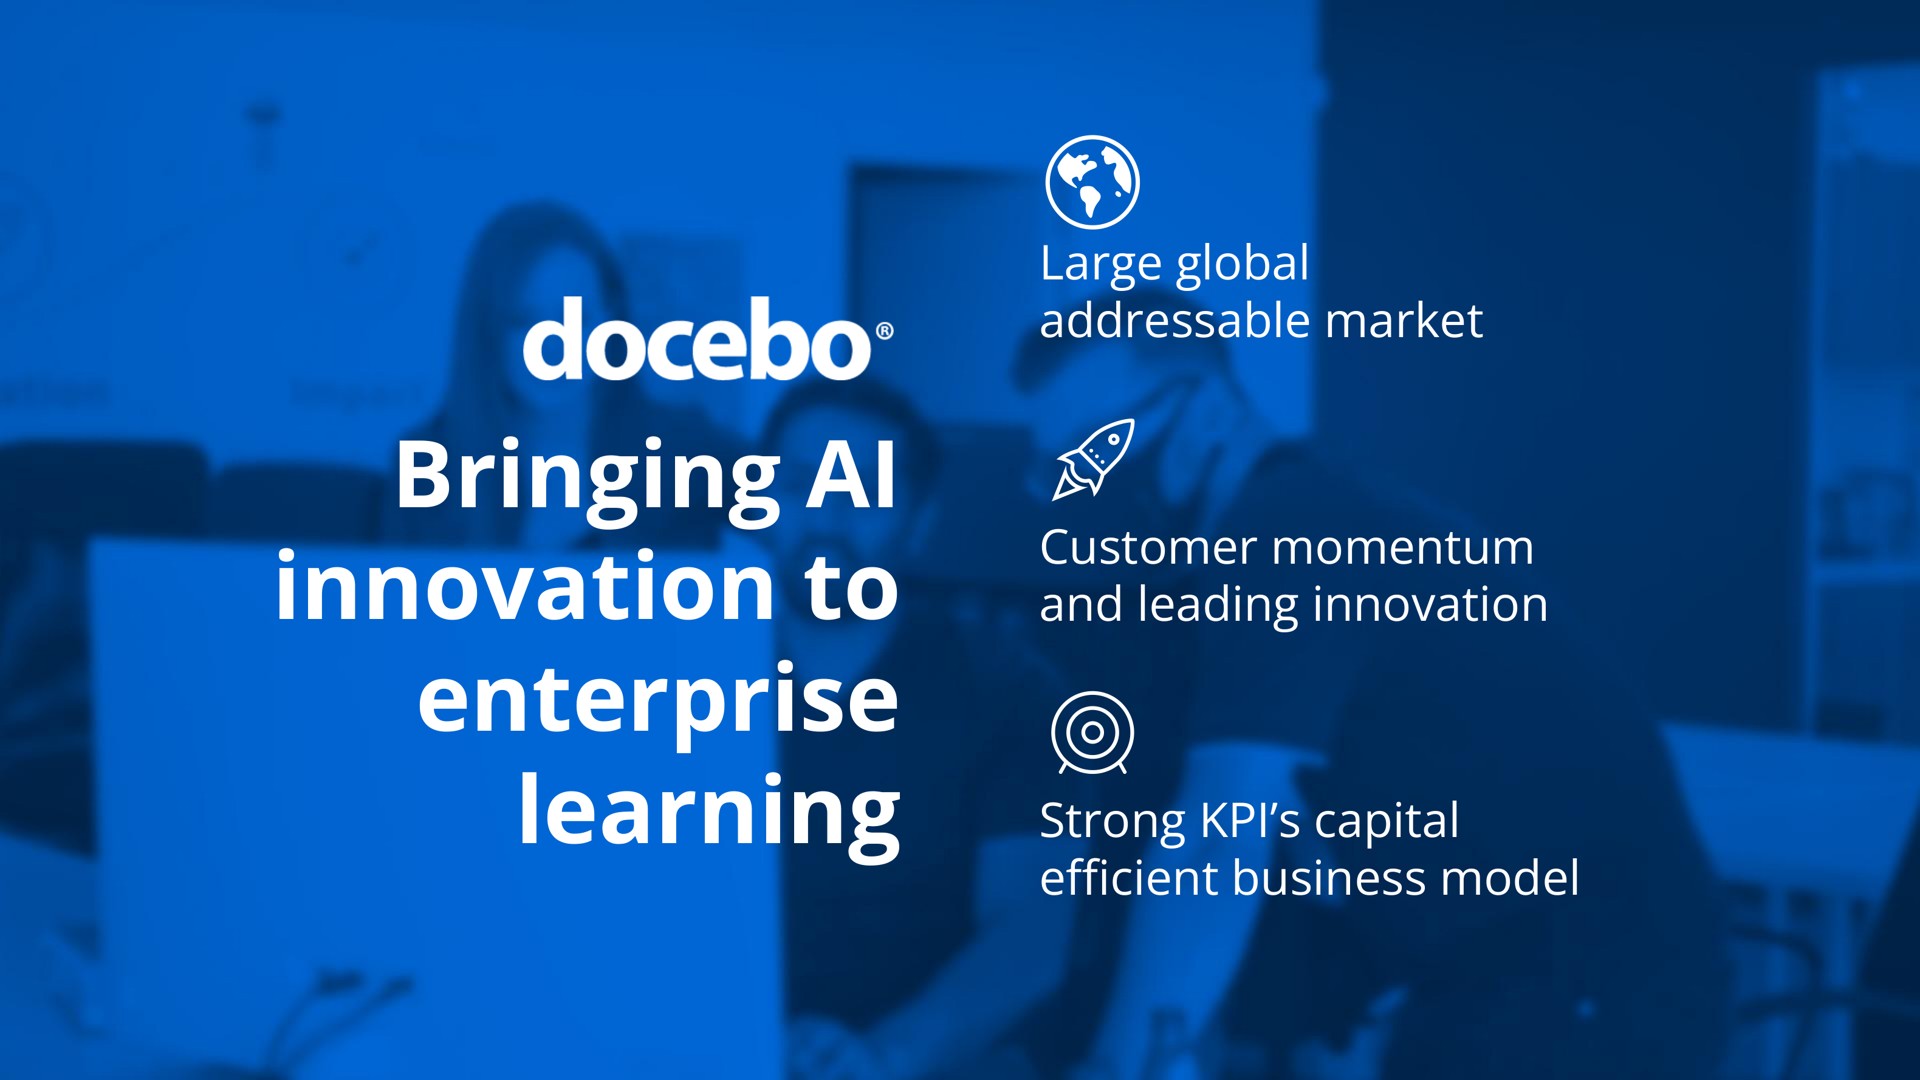 bringing innovation to enterprise learning large global market customer momentum and leading innovation strong capital business model me efficient | Docebo